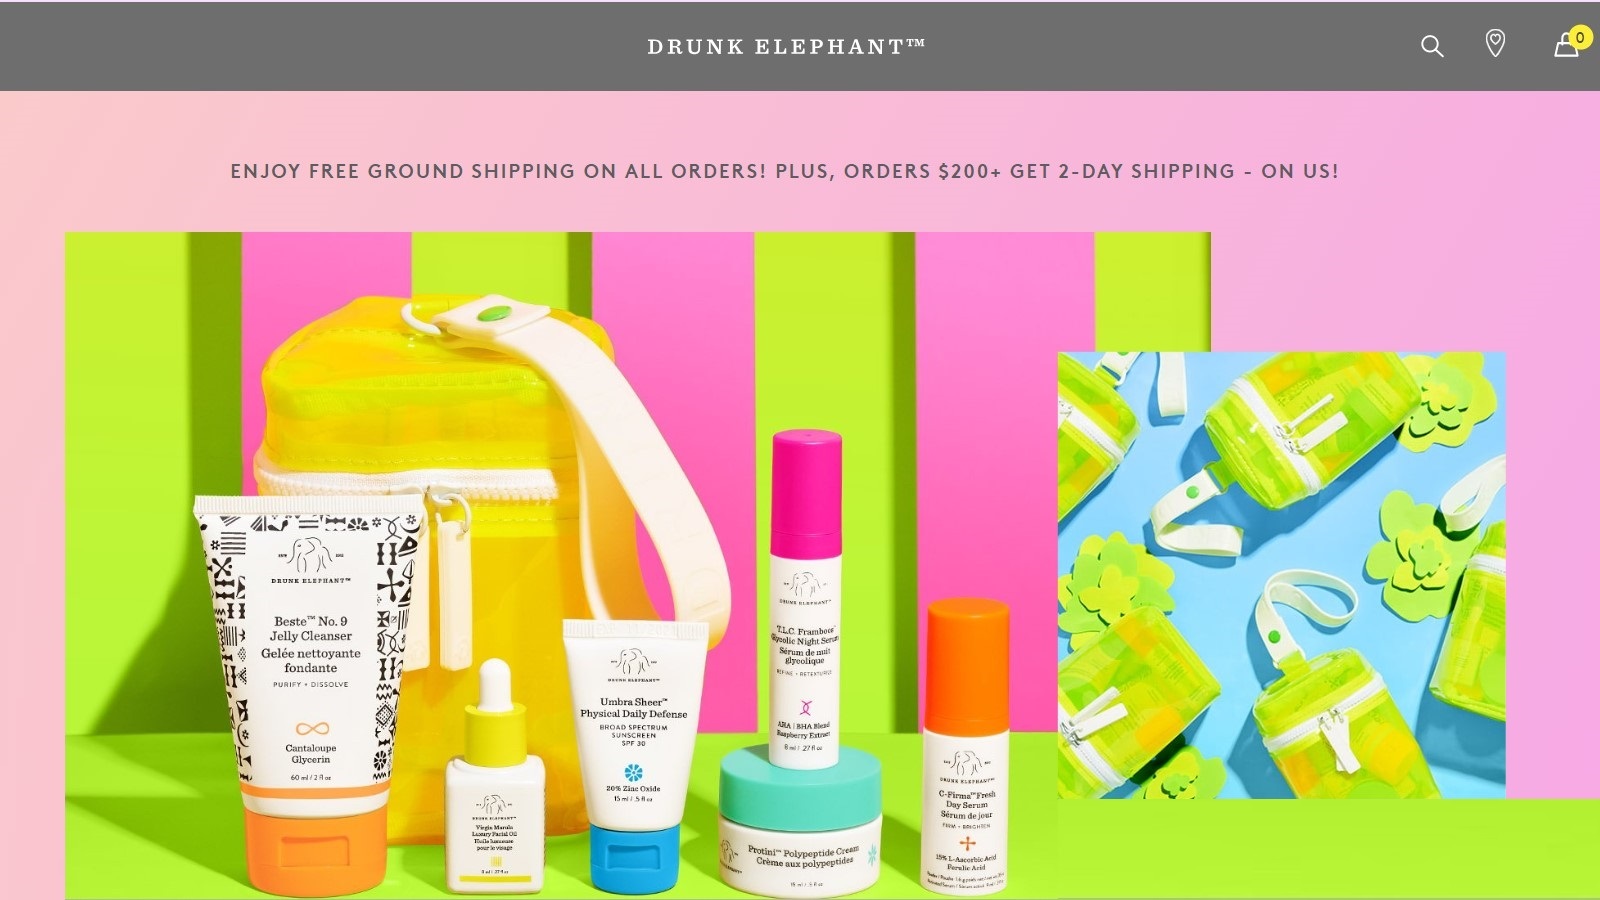 Drunk Elephant Skincare Review: Expert Opinions on Unique Products for Sensitive Skin